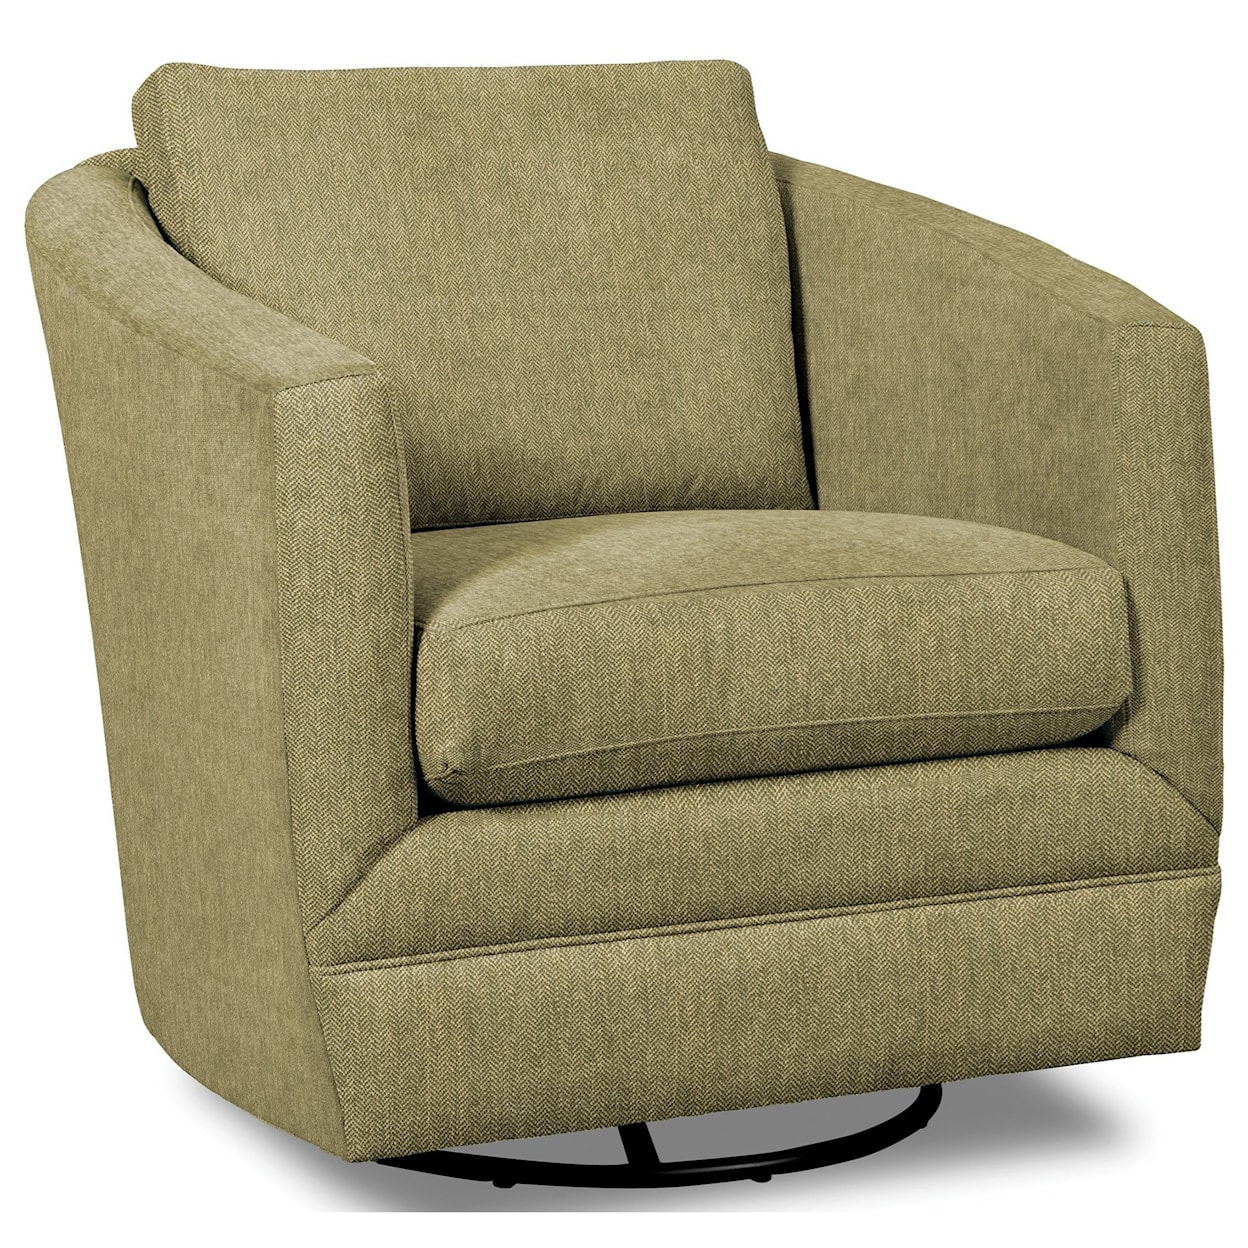 Craftmaster Accent Chairs Swivel Chair